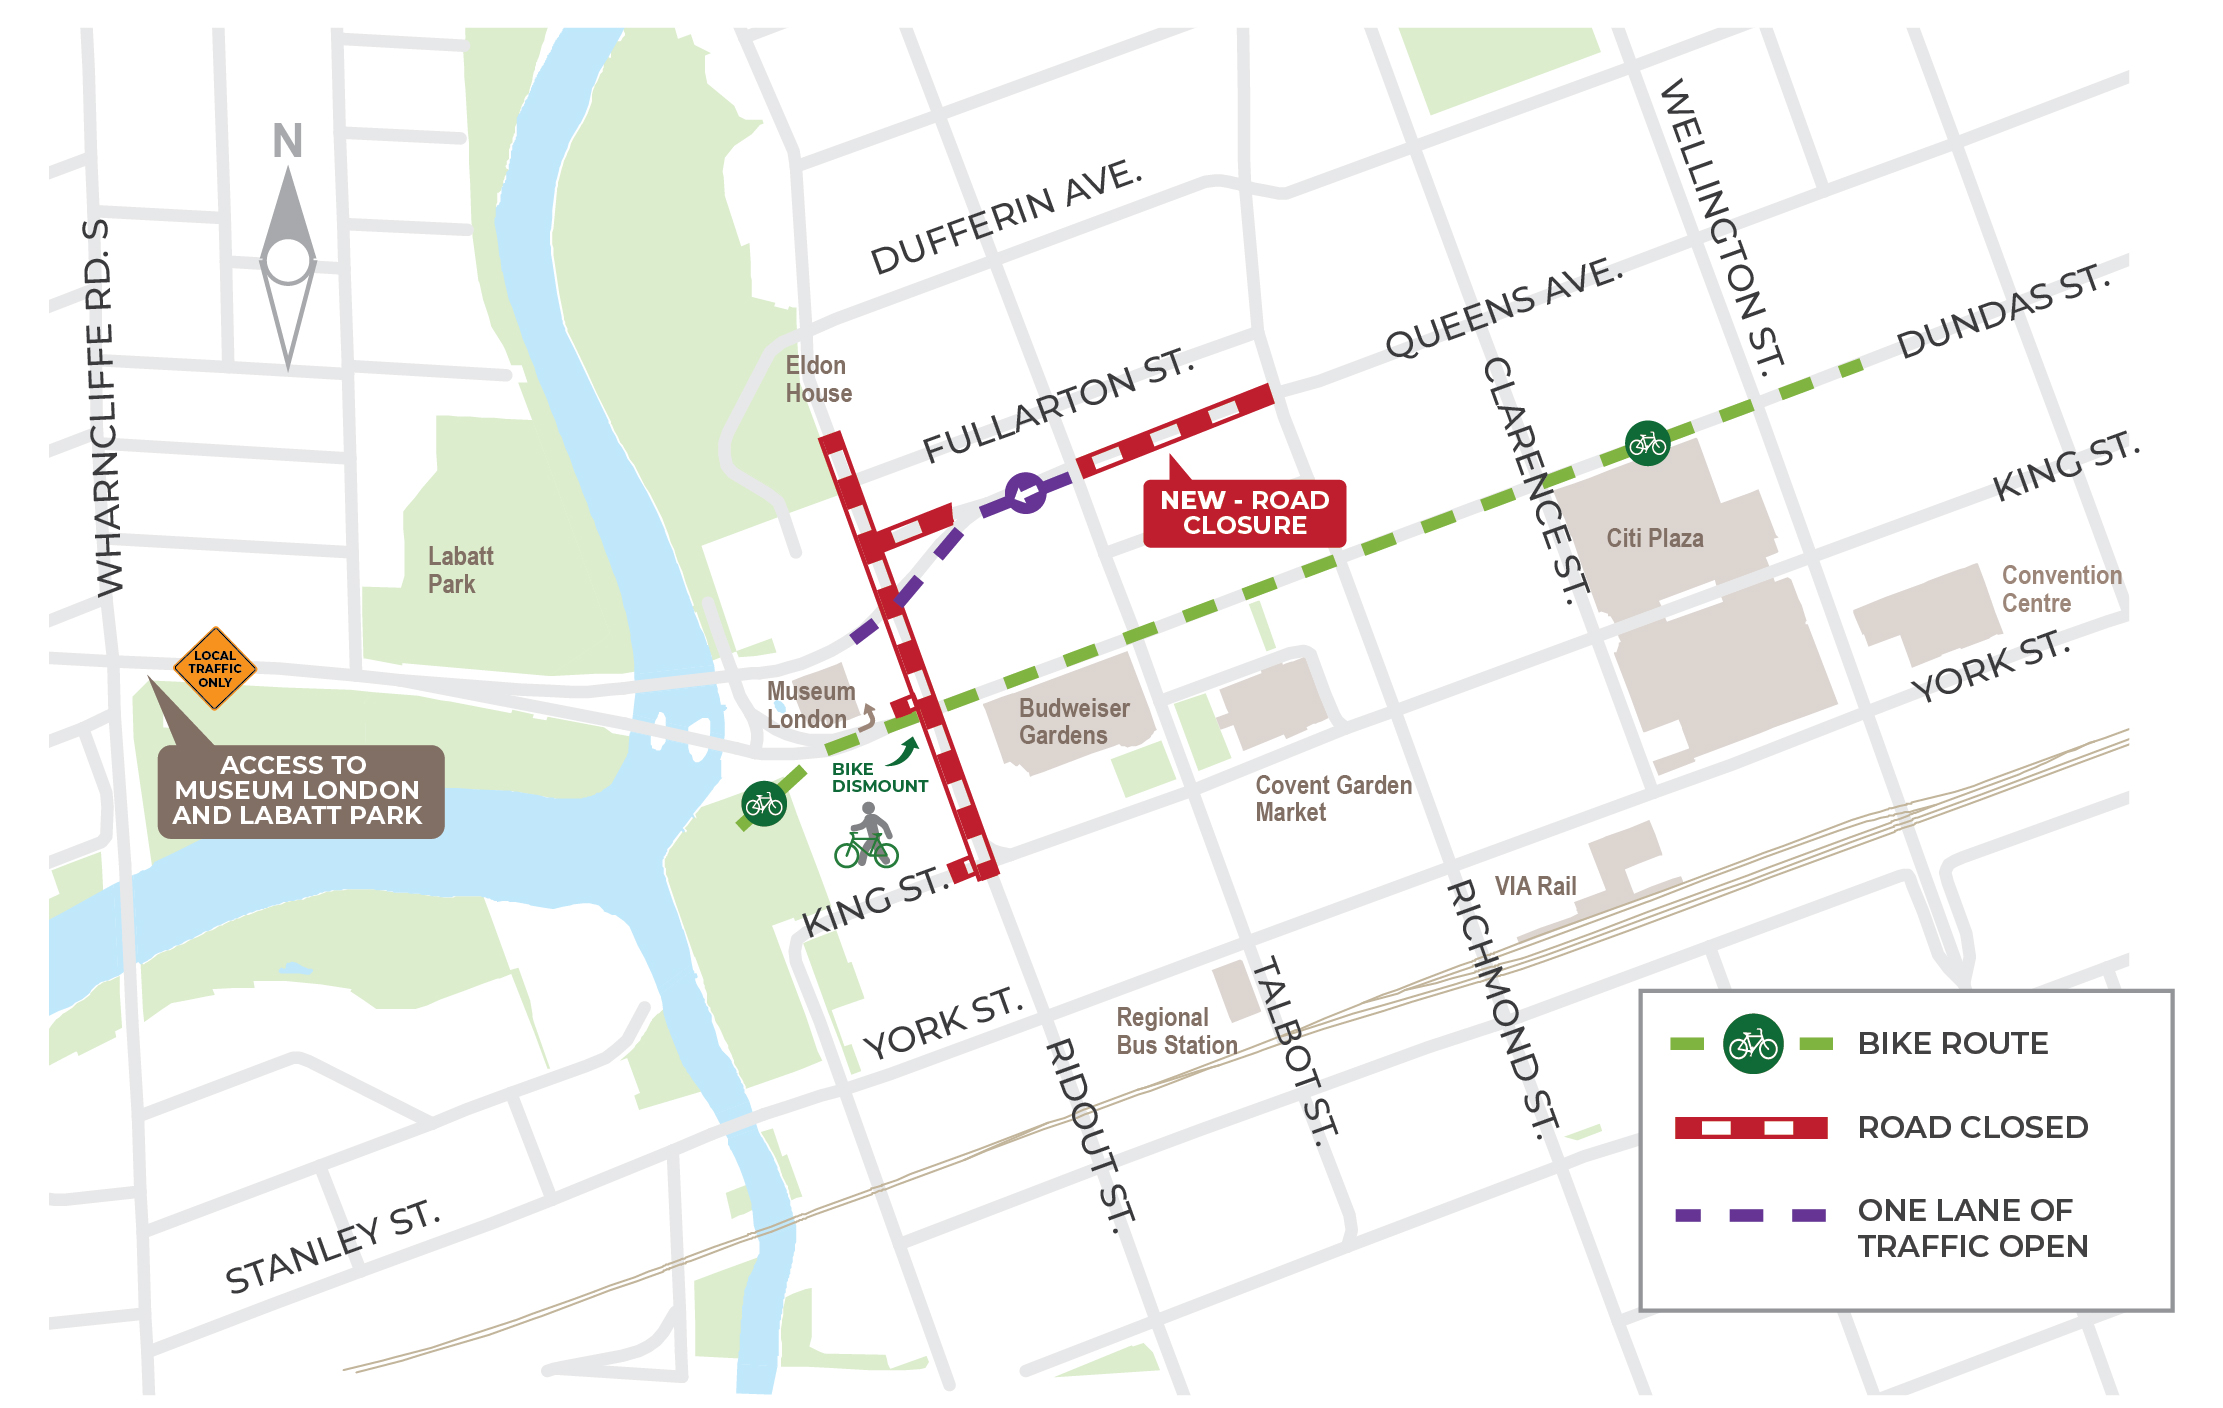 A map of the upcoming road closure on Queens Avenue between Richmond Street and Talbot Street.